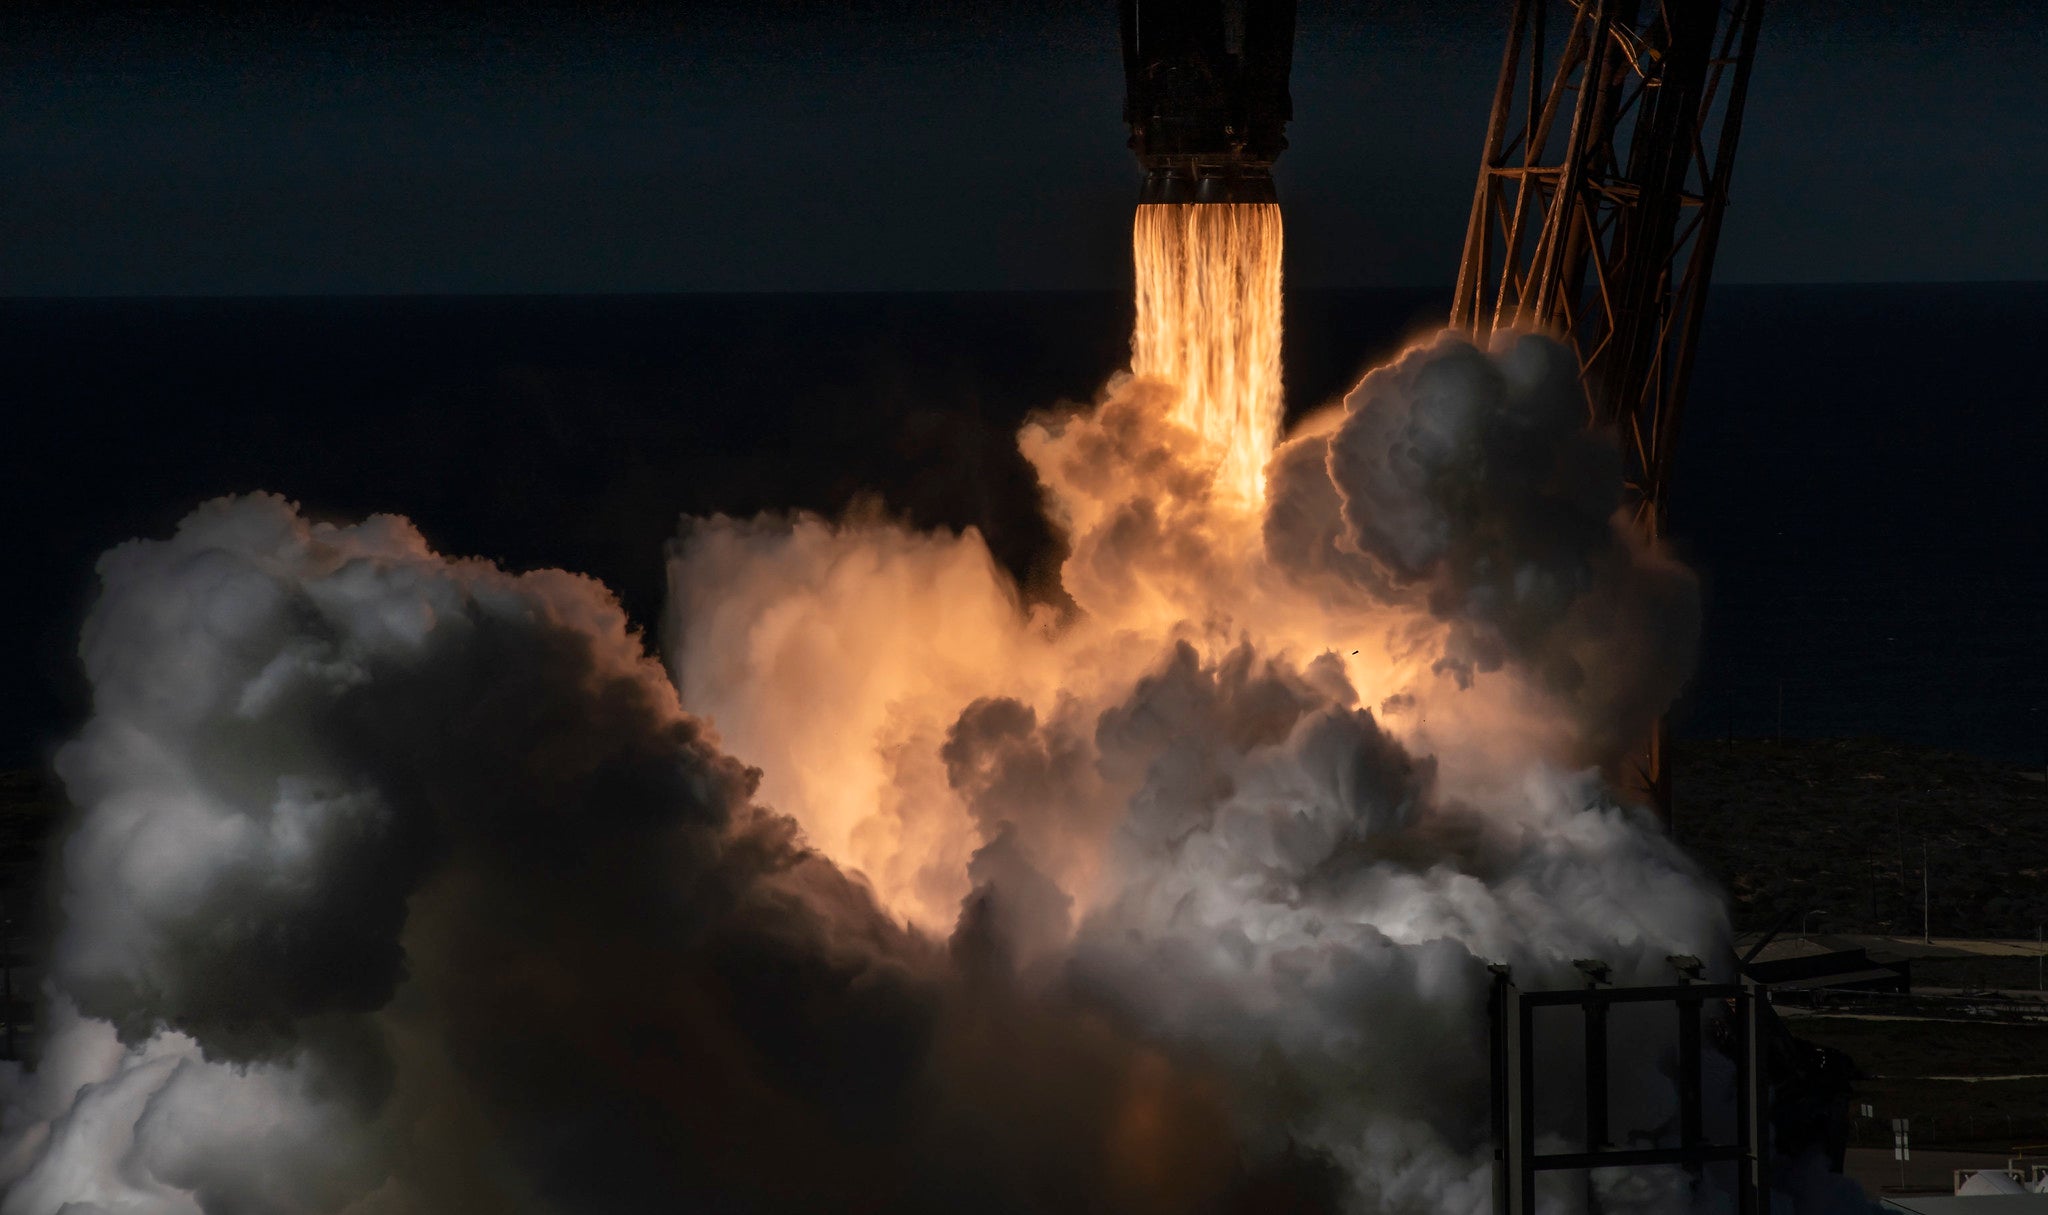 Previously-flown SpaceX Falcon 9 propels U.S. National Security payload to orbit –‘It reduces our costs, which reflects our commitment to using taxpayer dollars responsibly’